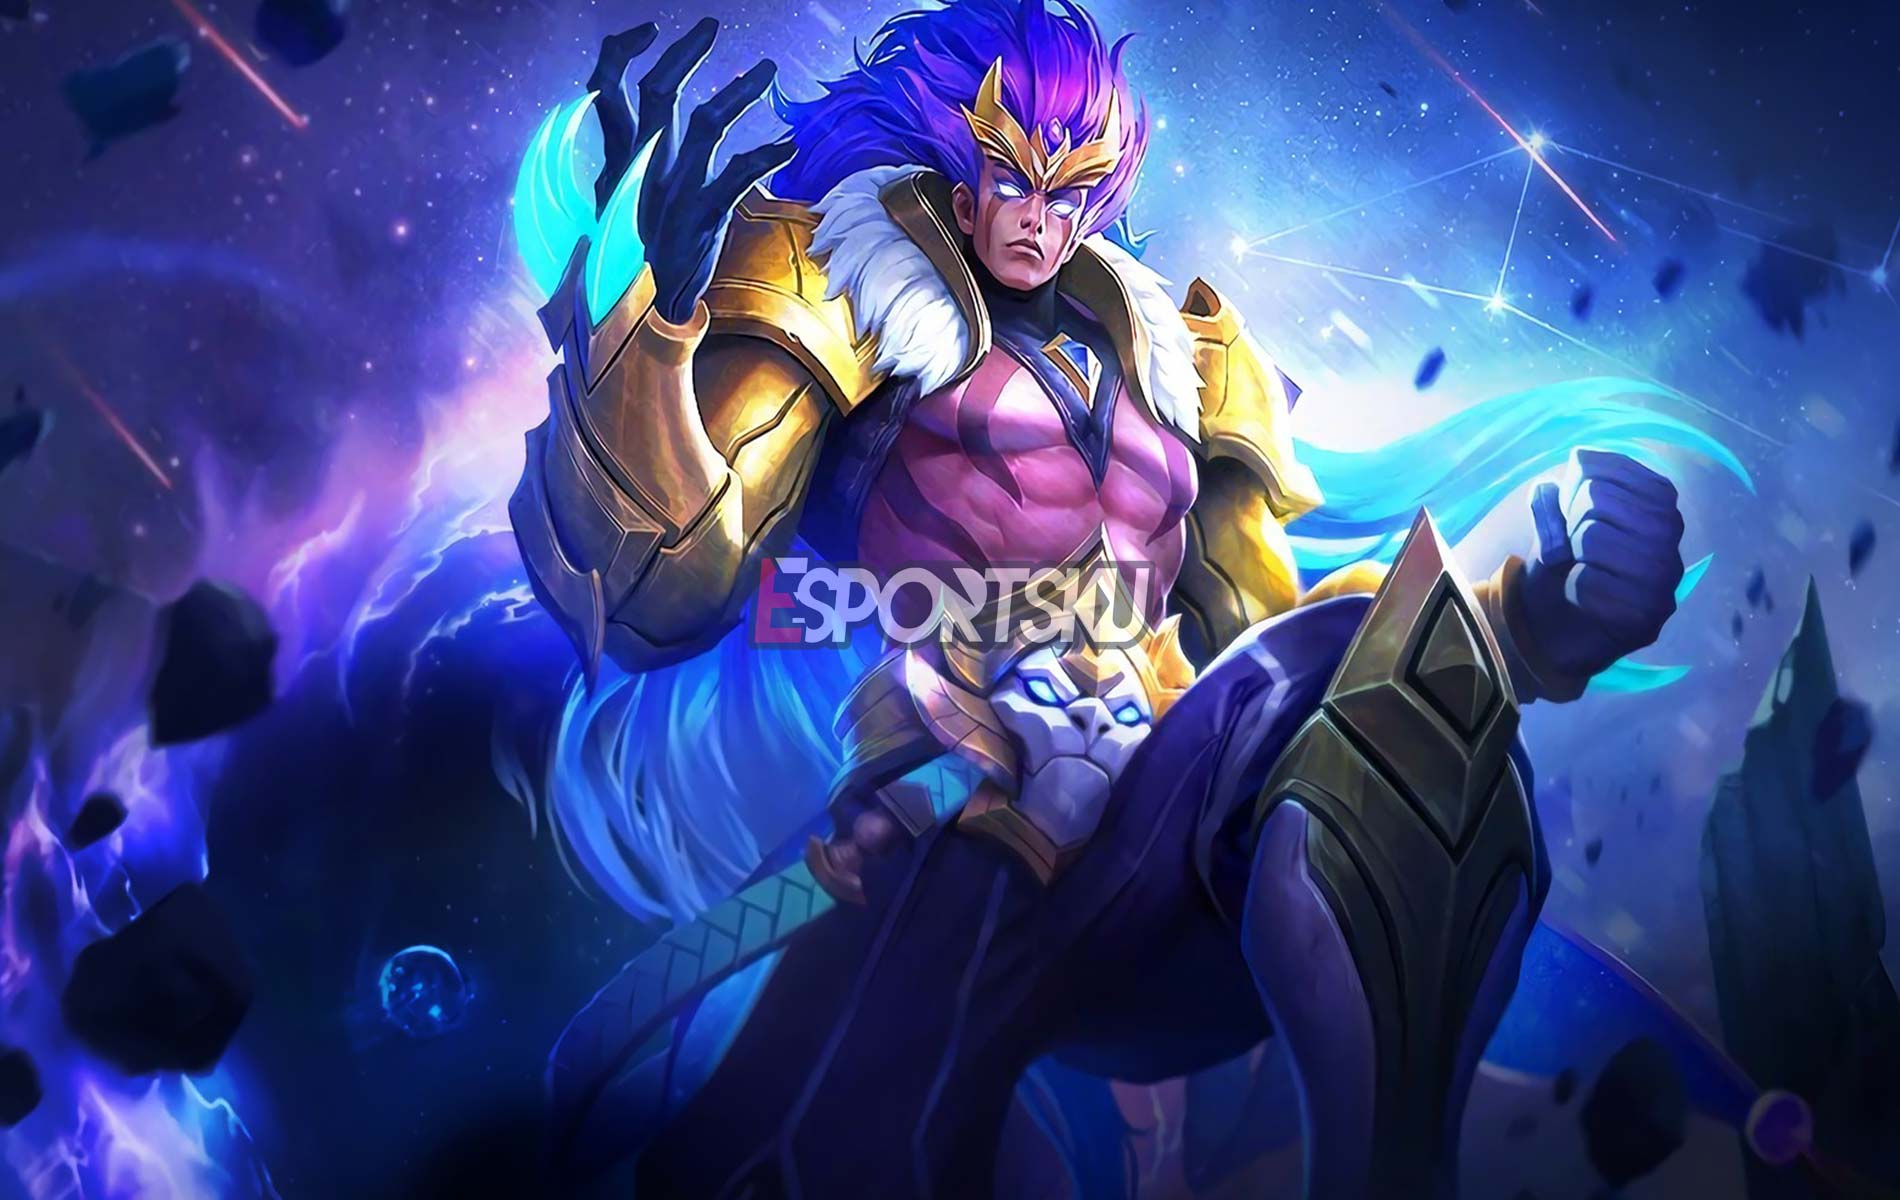 How to Get Free Badang Skin in Mobile Legends (ML)